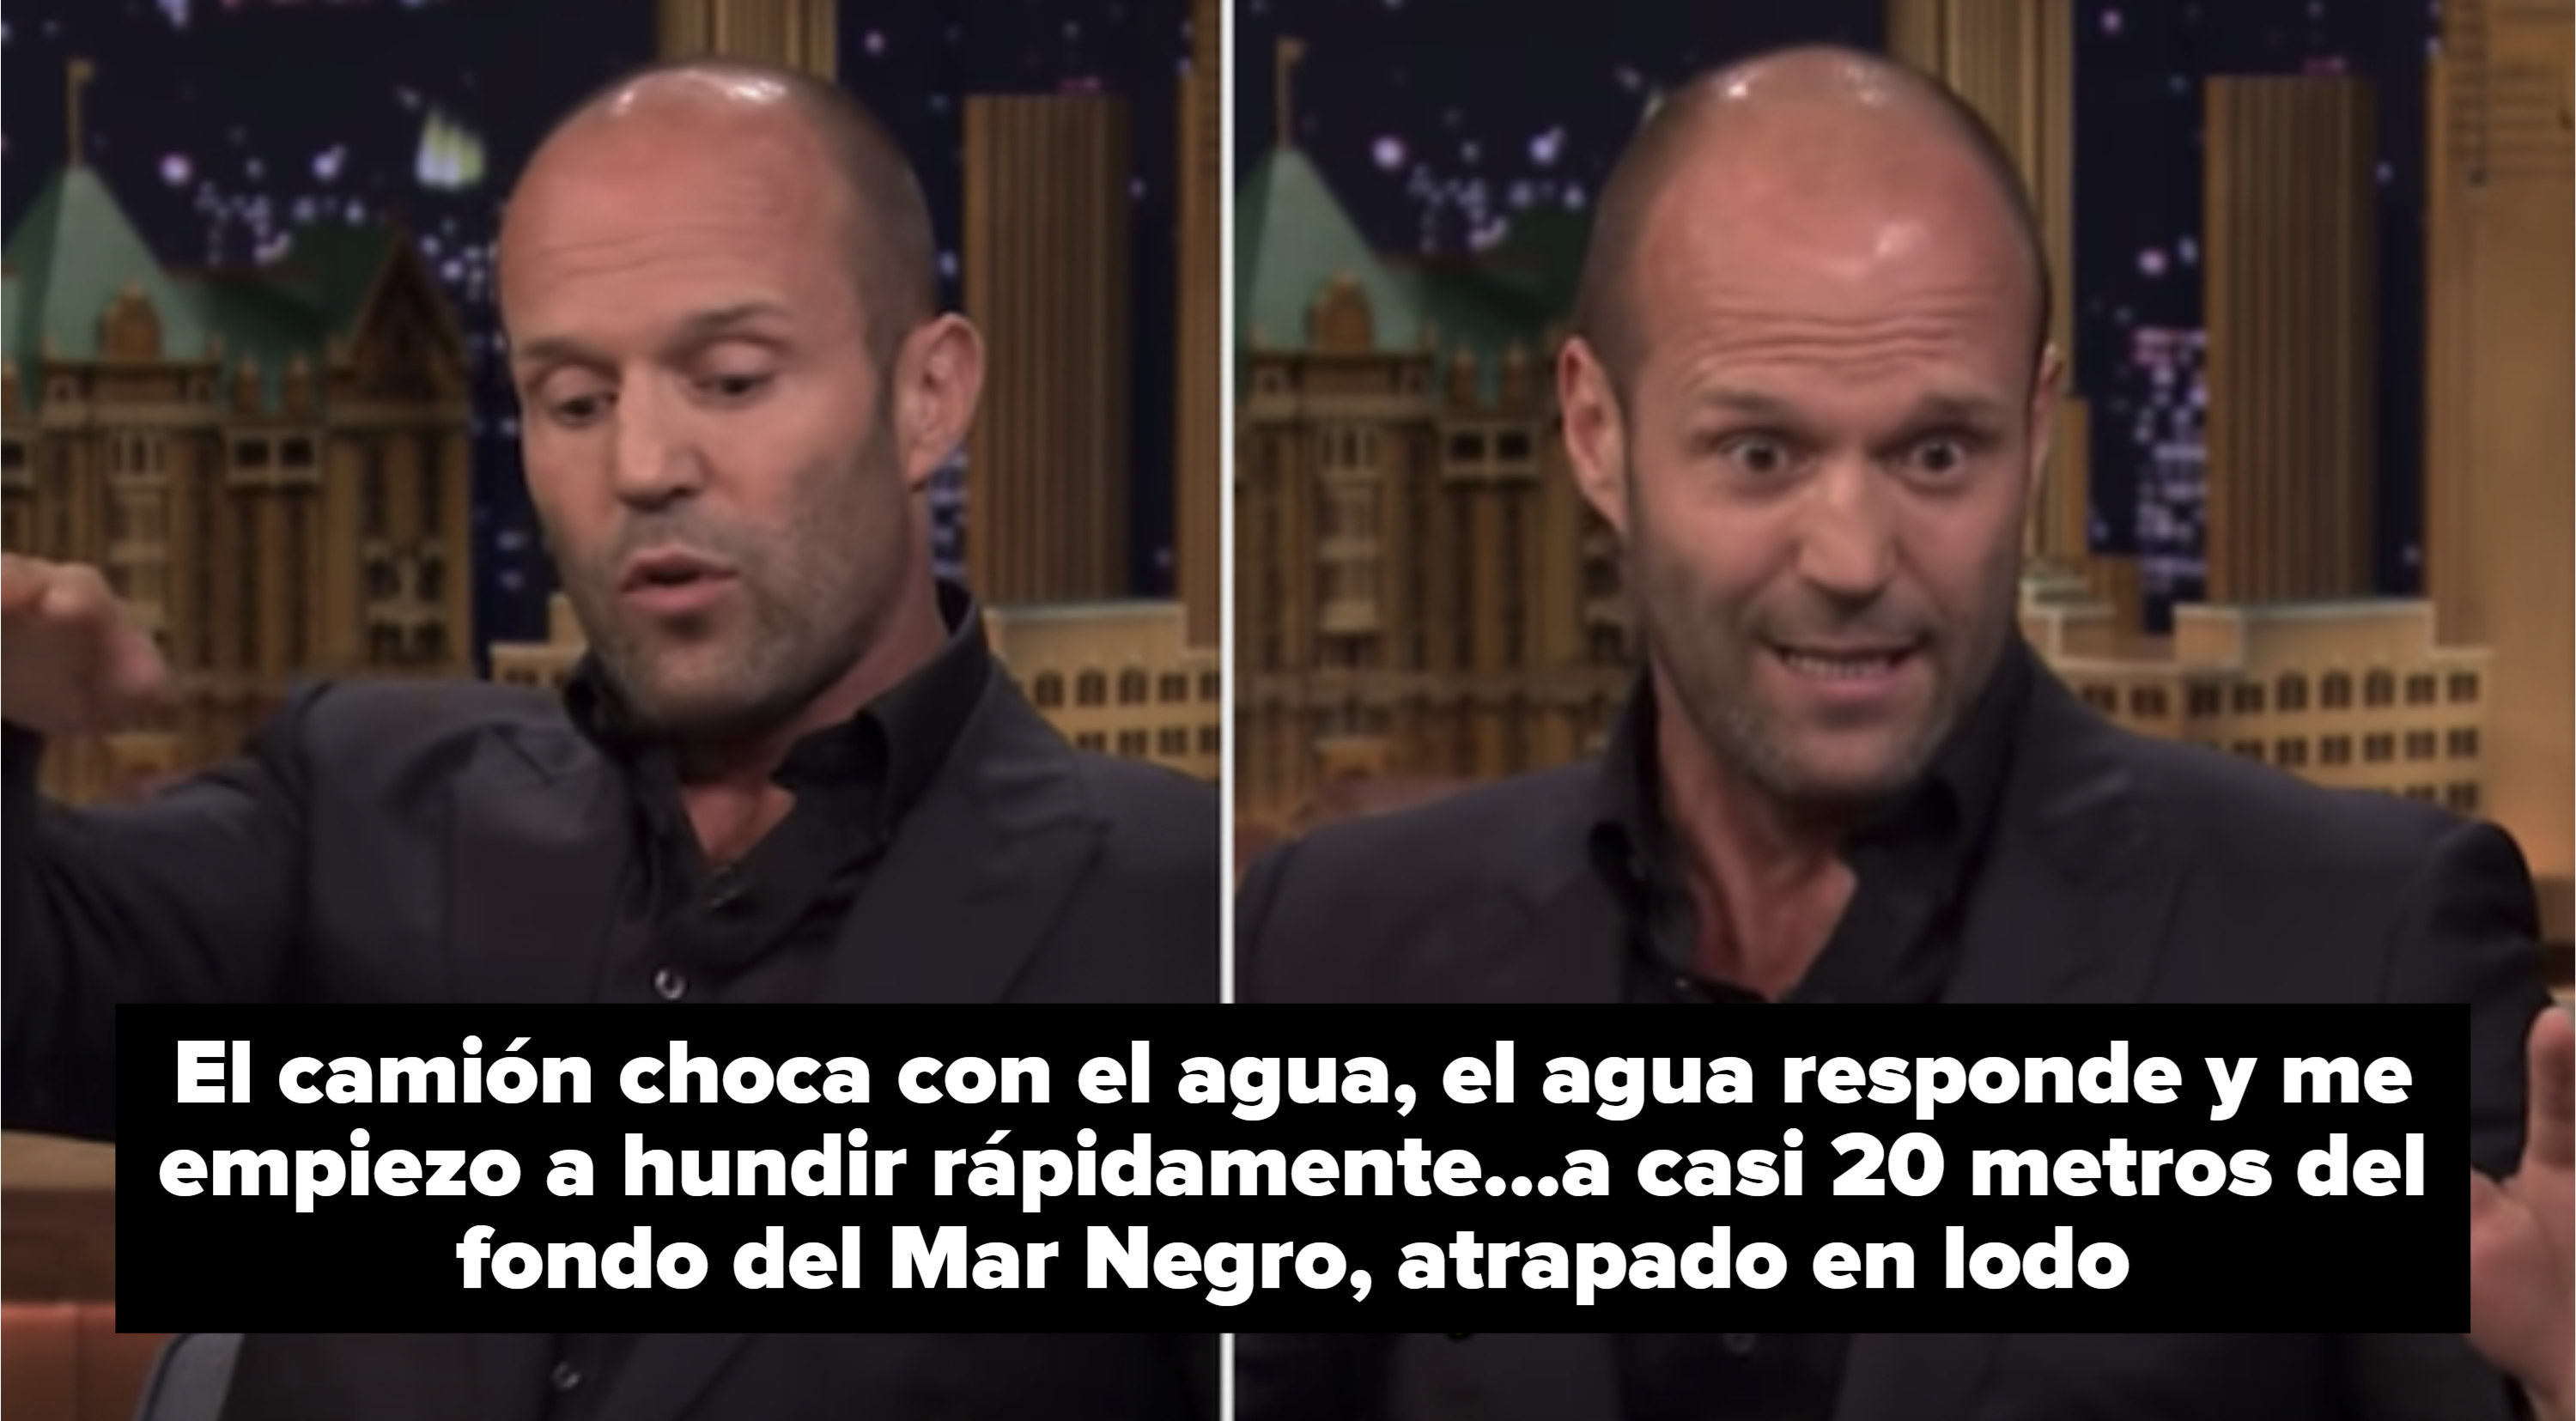 Jason Statham telling the story on &quot;The Tonight Show&quot;